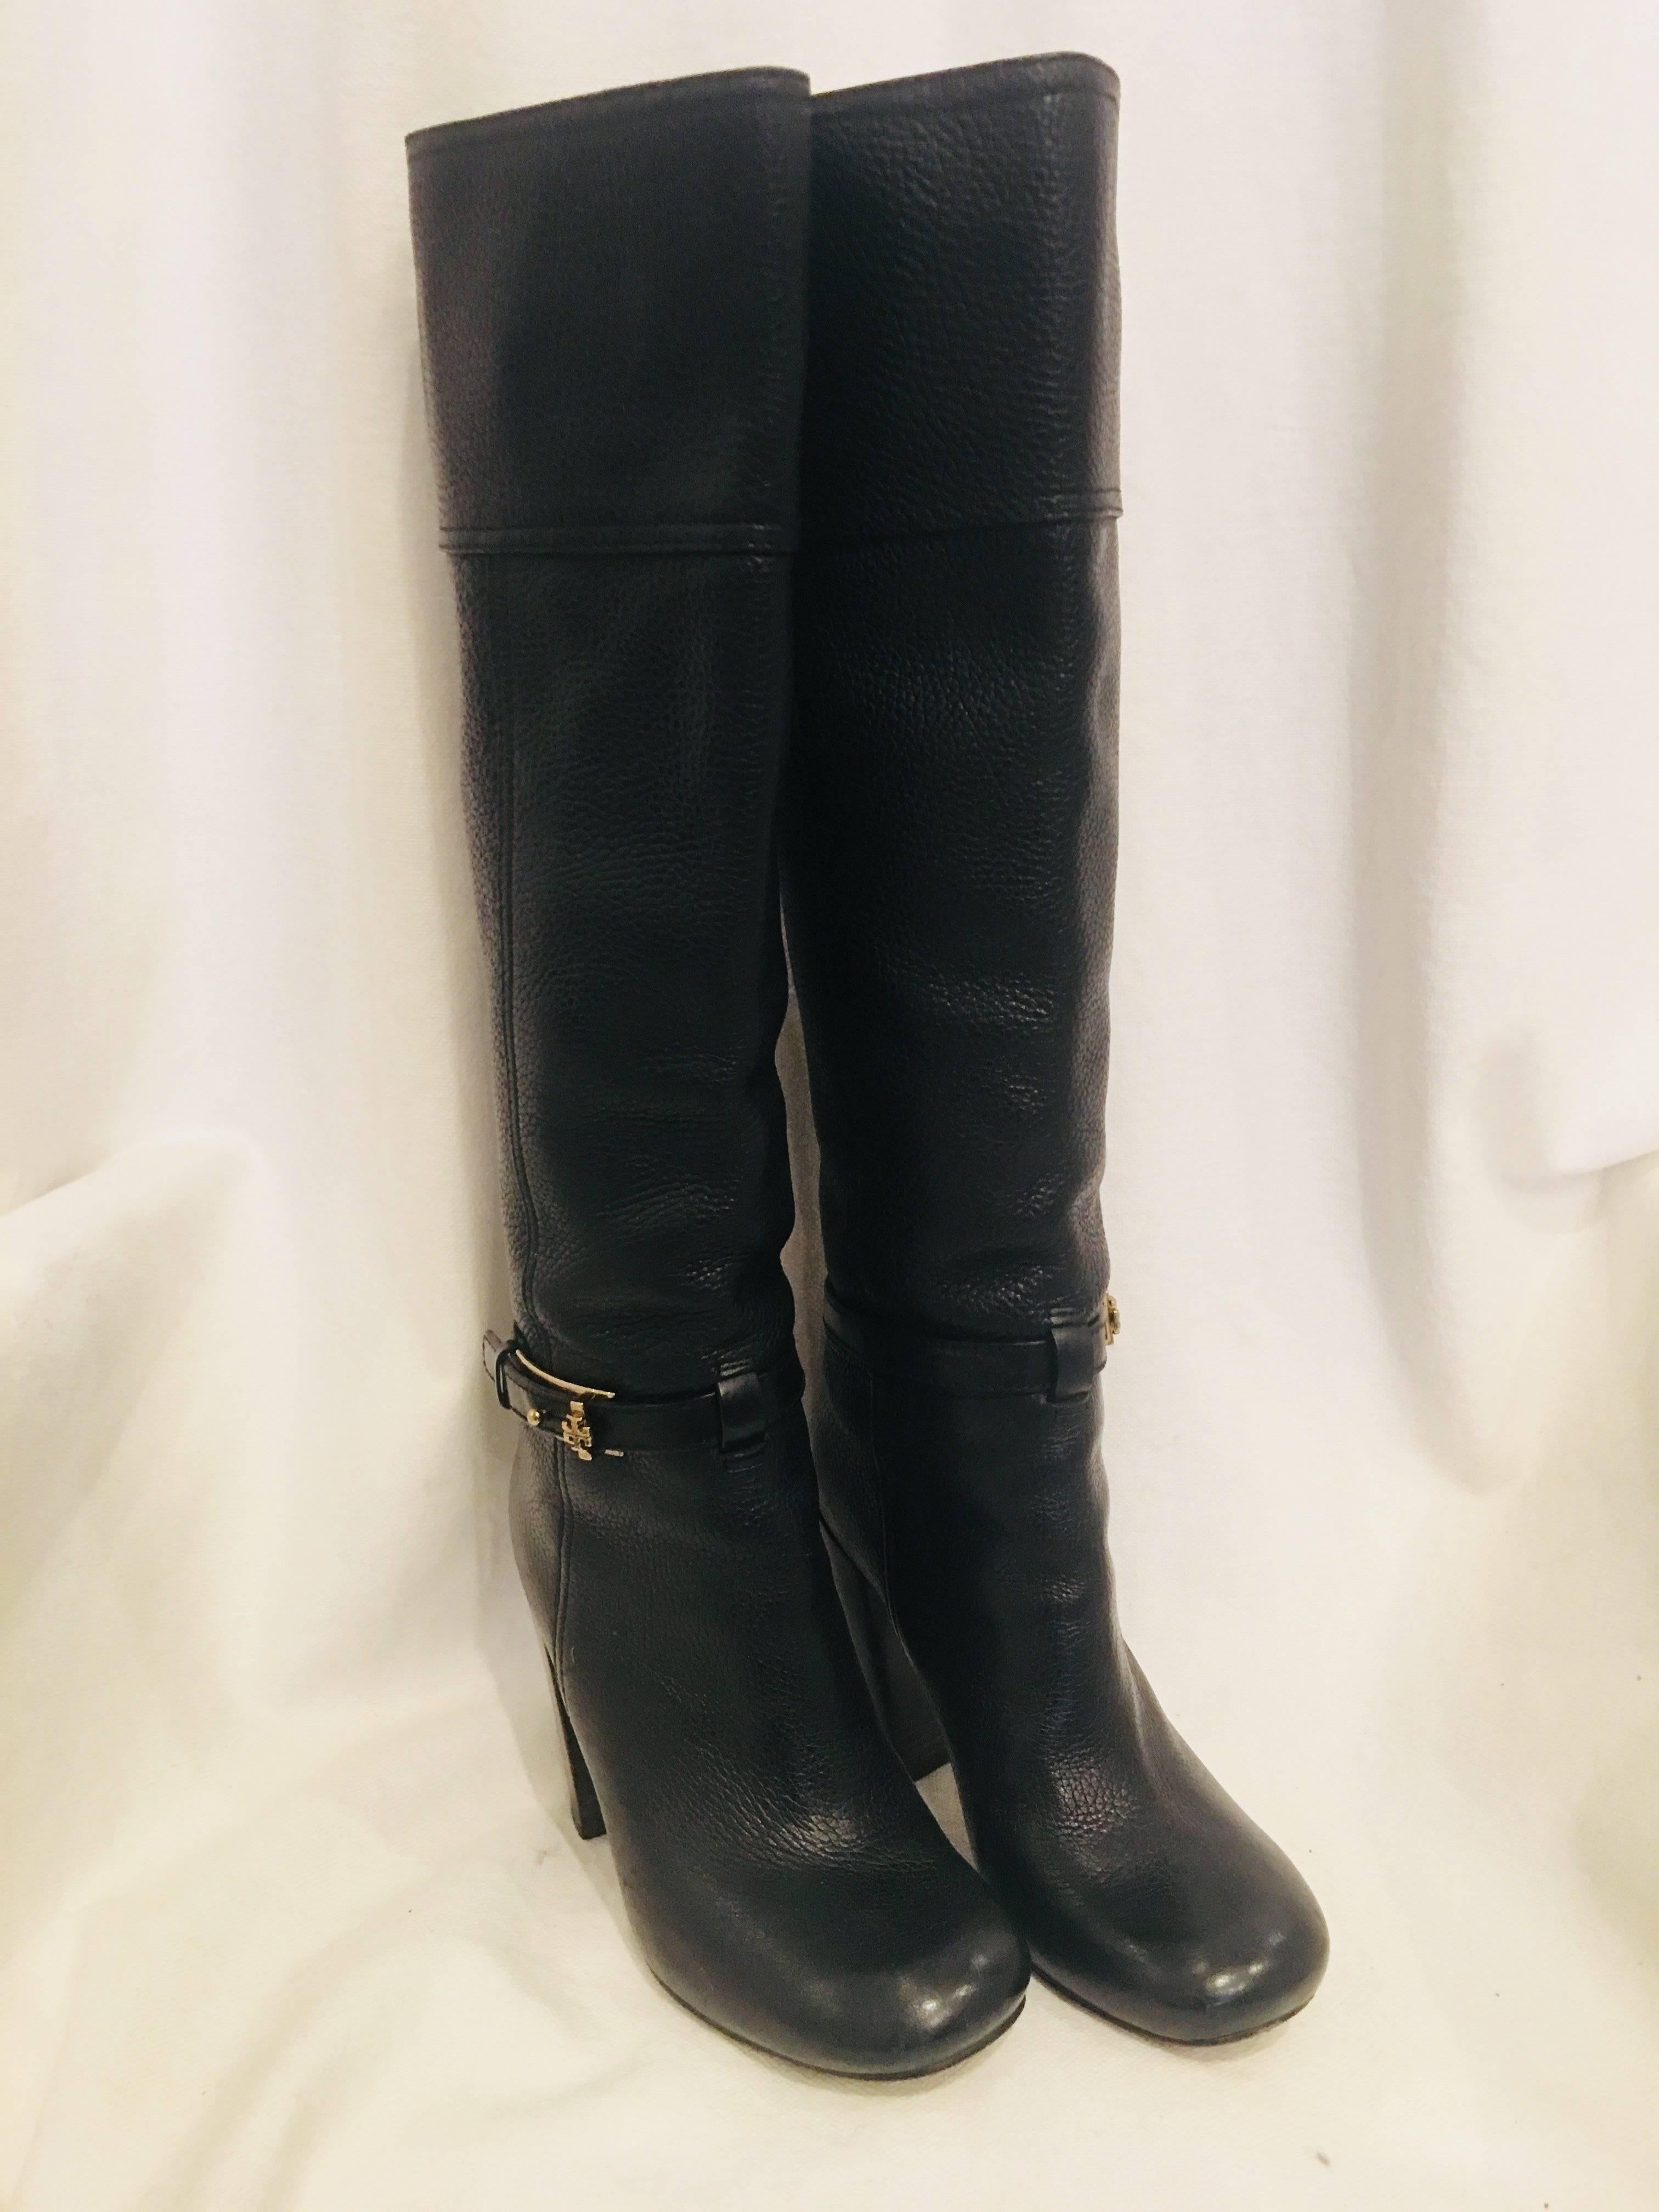 Tory Burch Pebbled Black Leather Boots with Buckle, Black Zipper, and Wooden Heel.